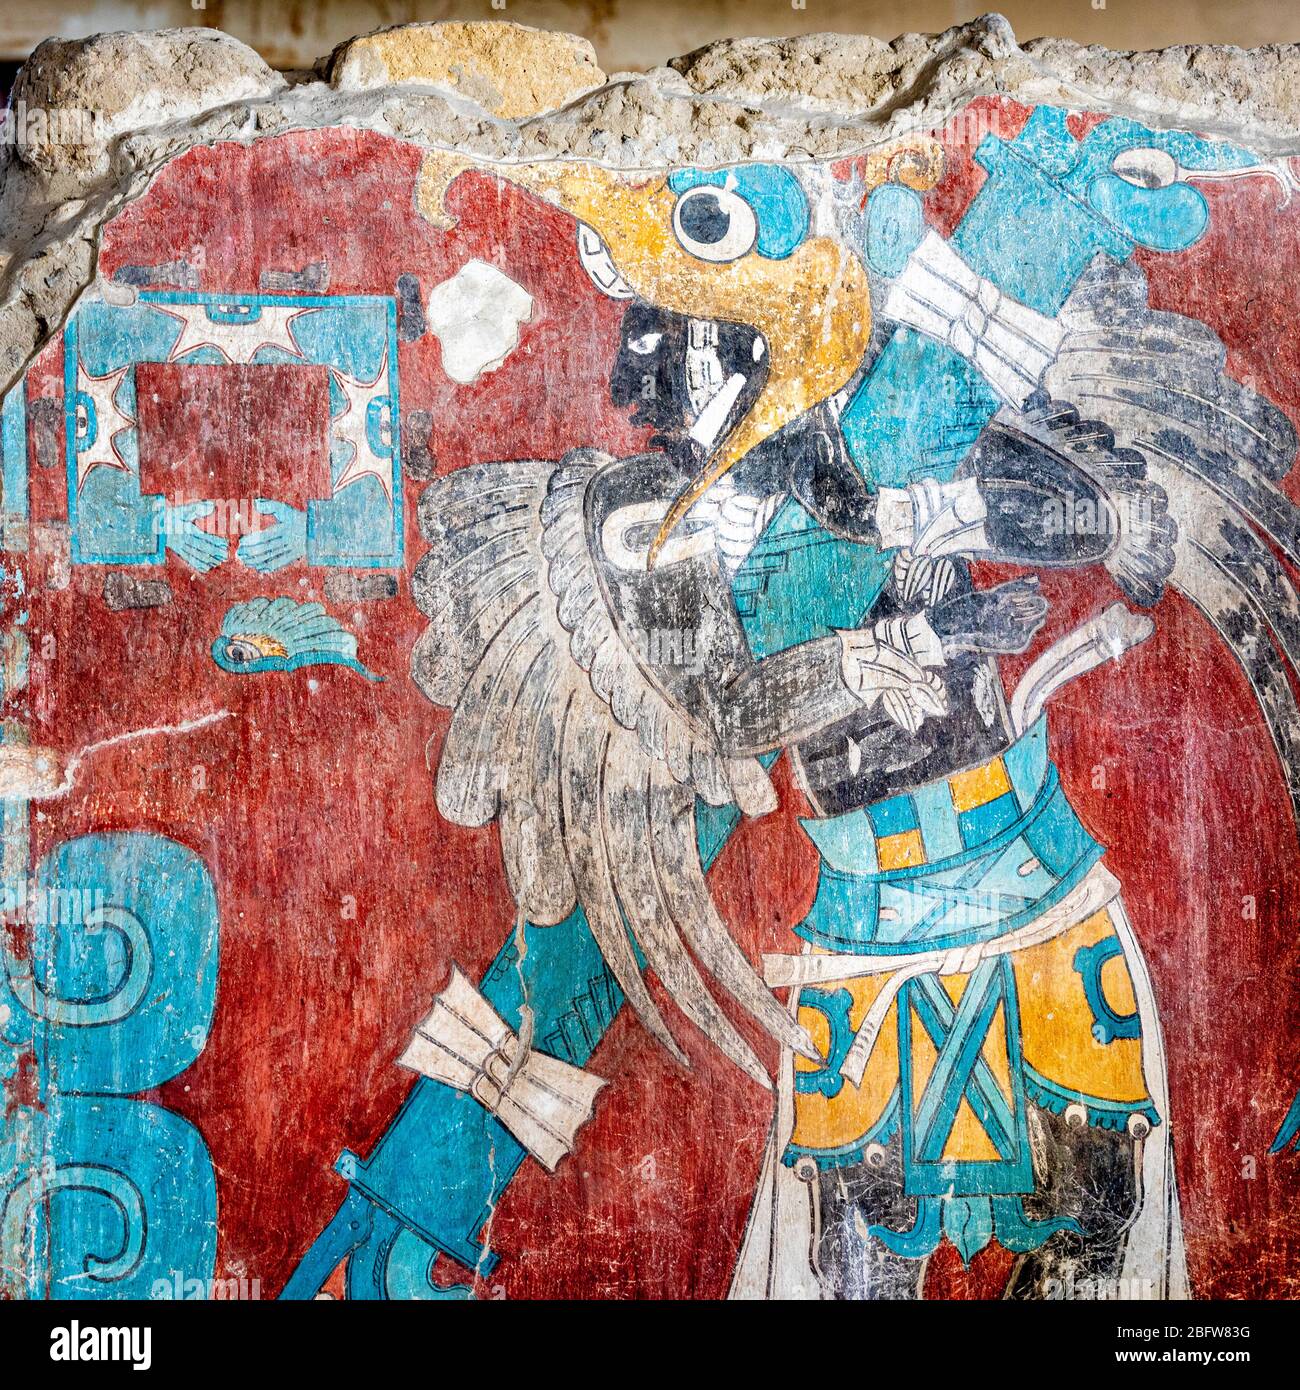 Mural titled 'Eagle Man' at the Cacaxtla, Tlaxcala ruins in Mexico. Stock Photo